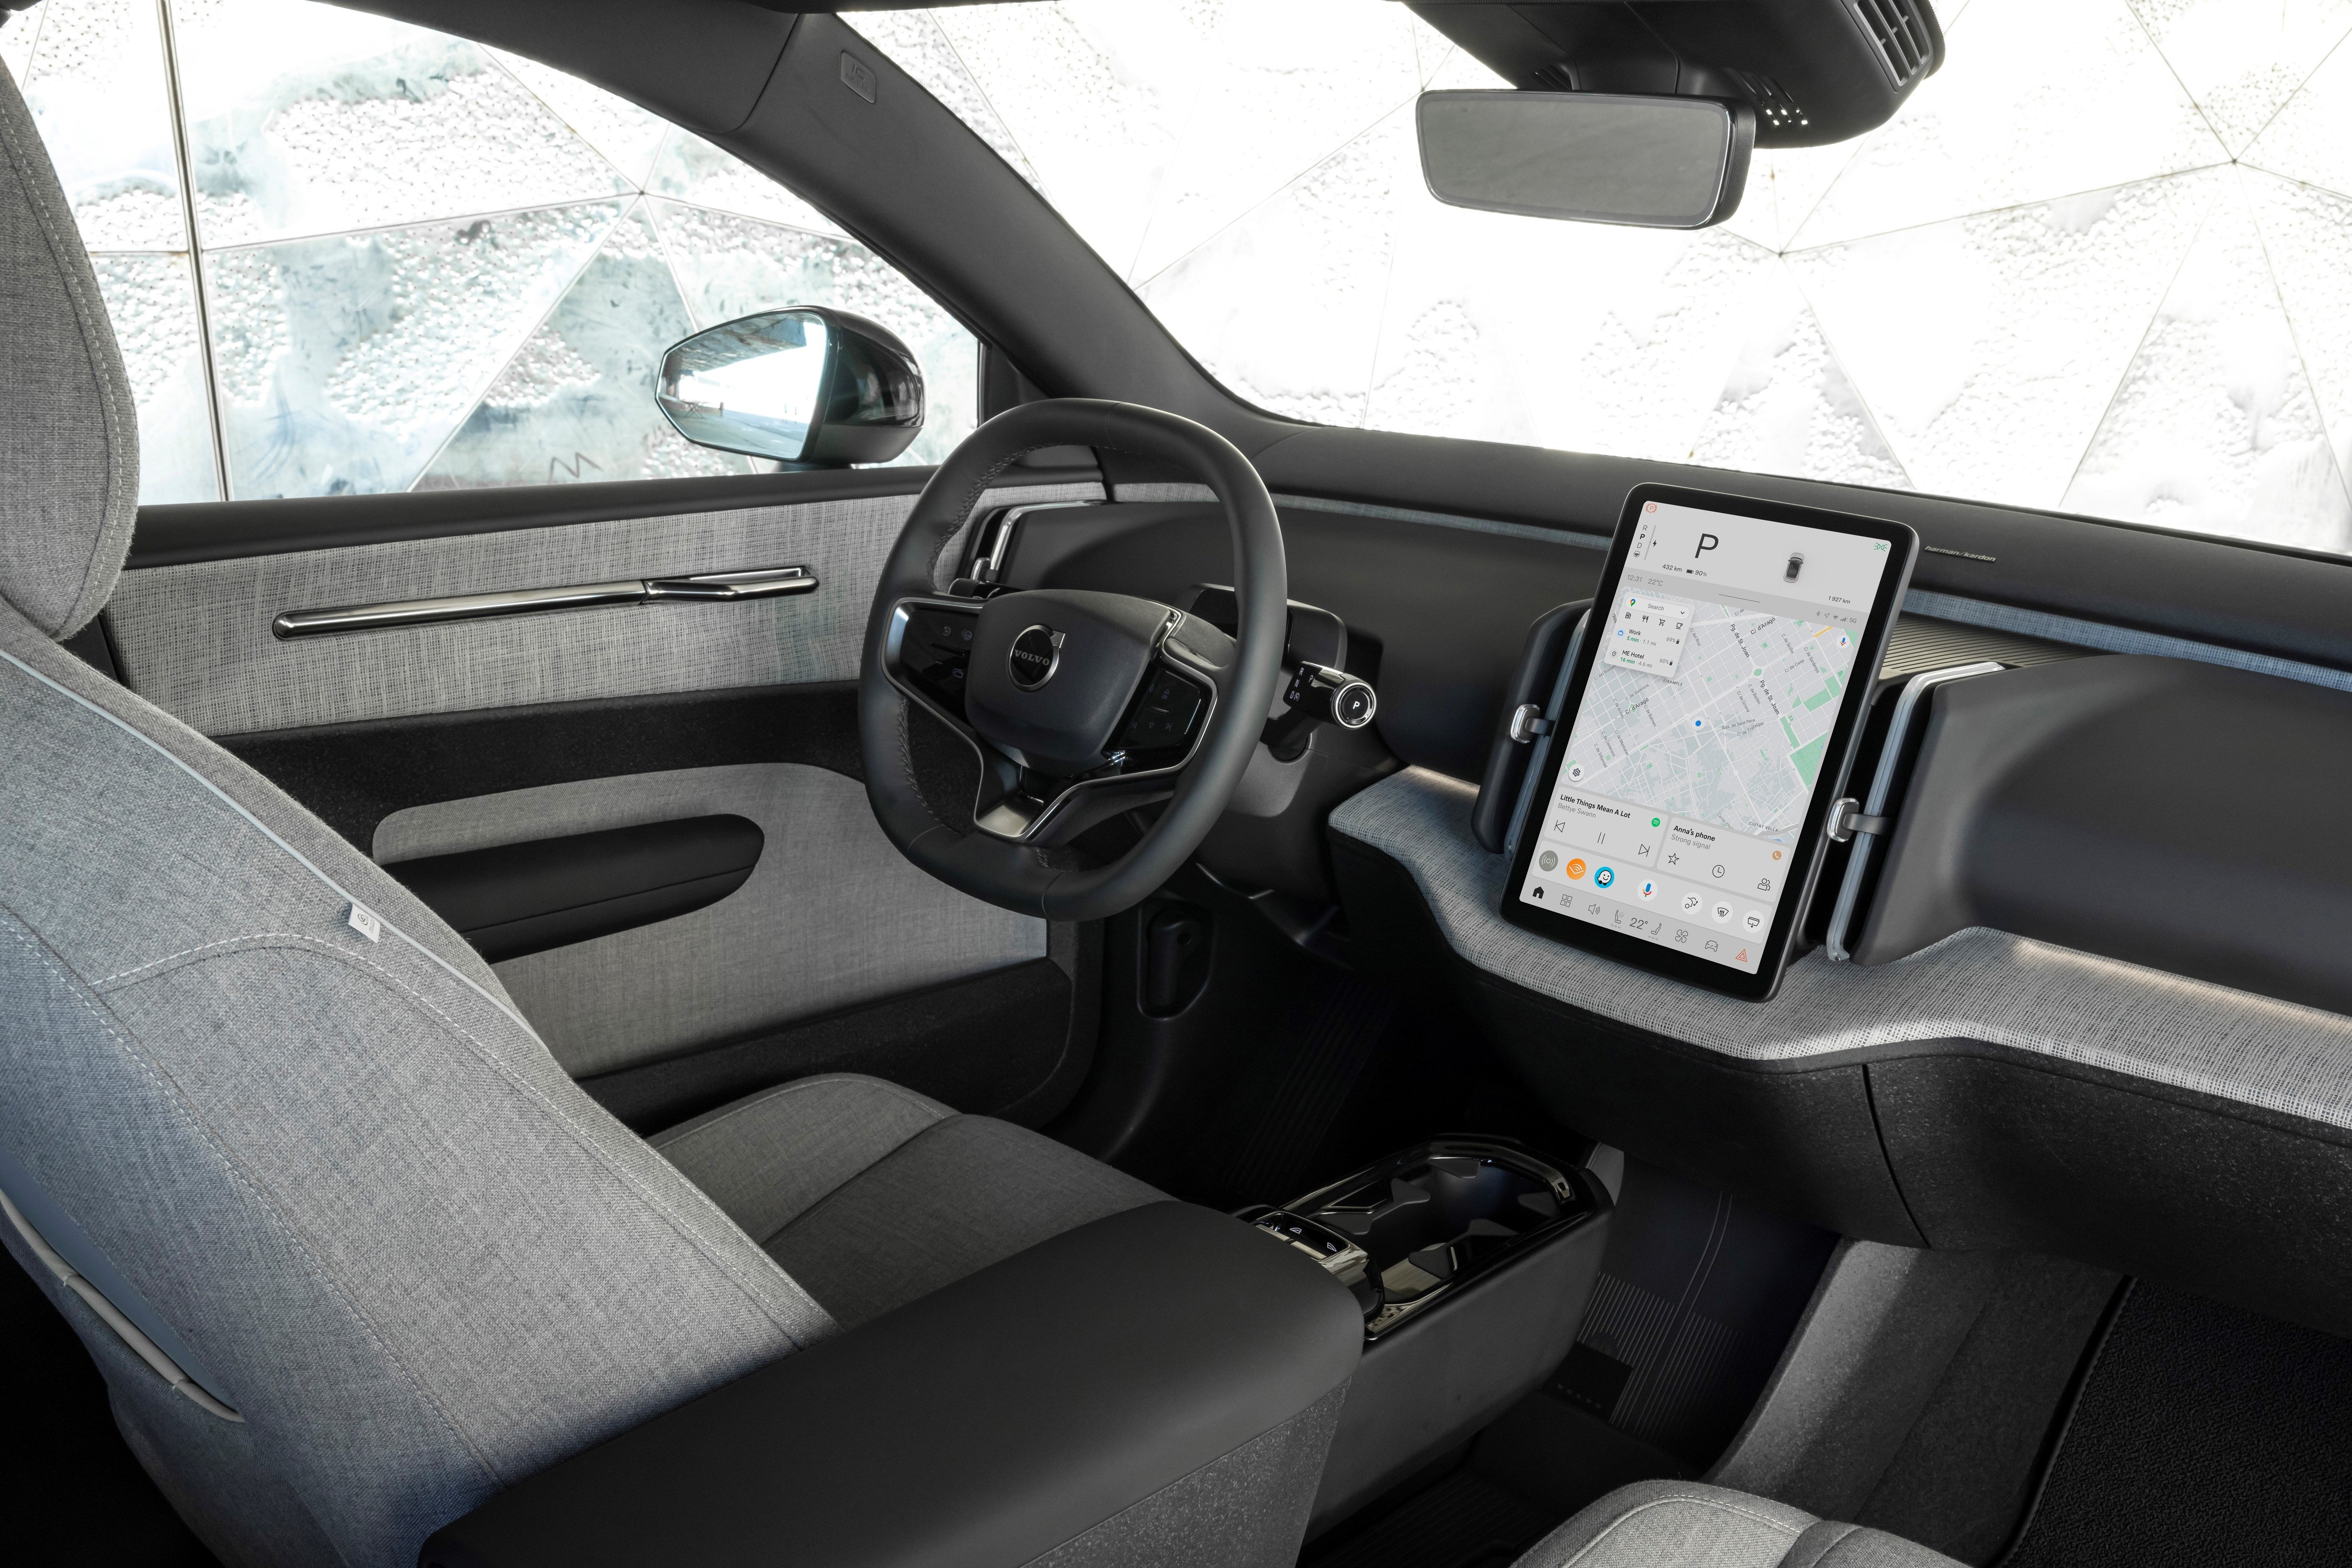 Centralising controls means even the glovebox and windows are opened via the touchscreen